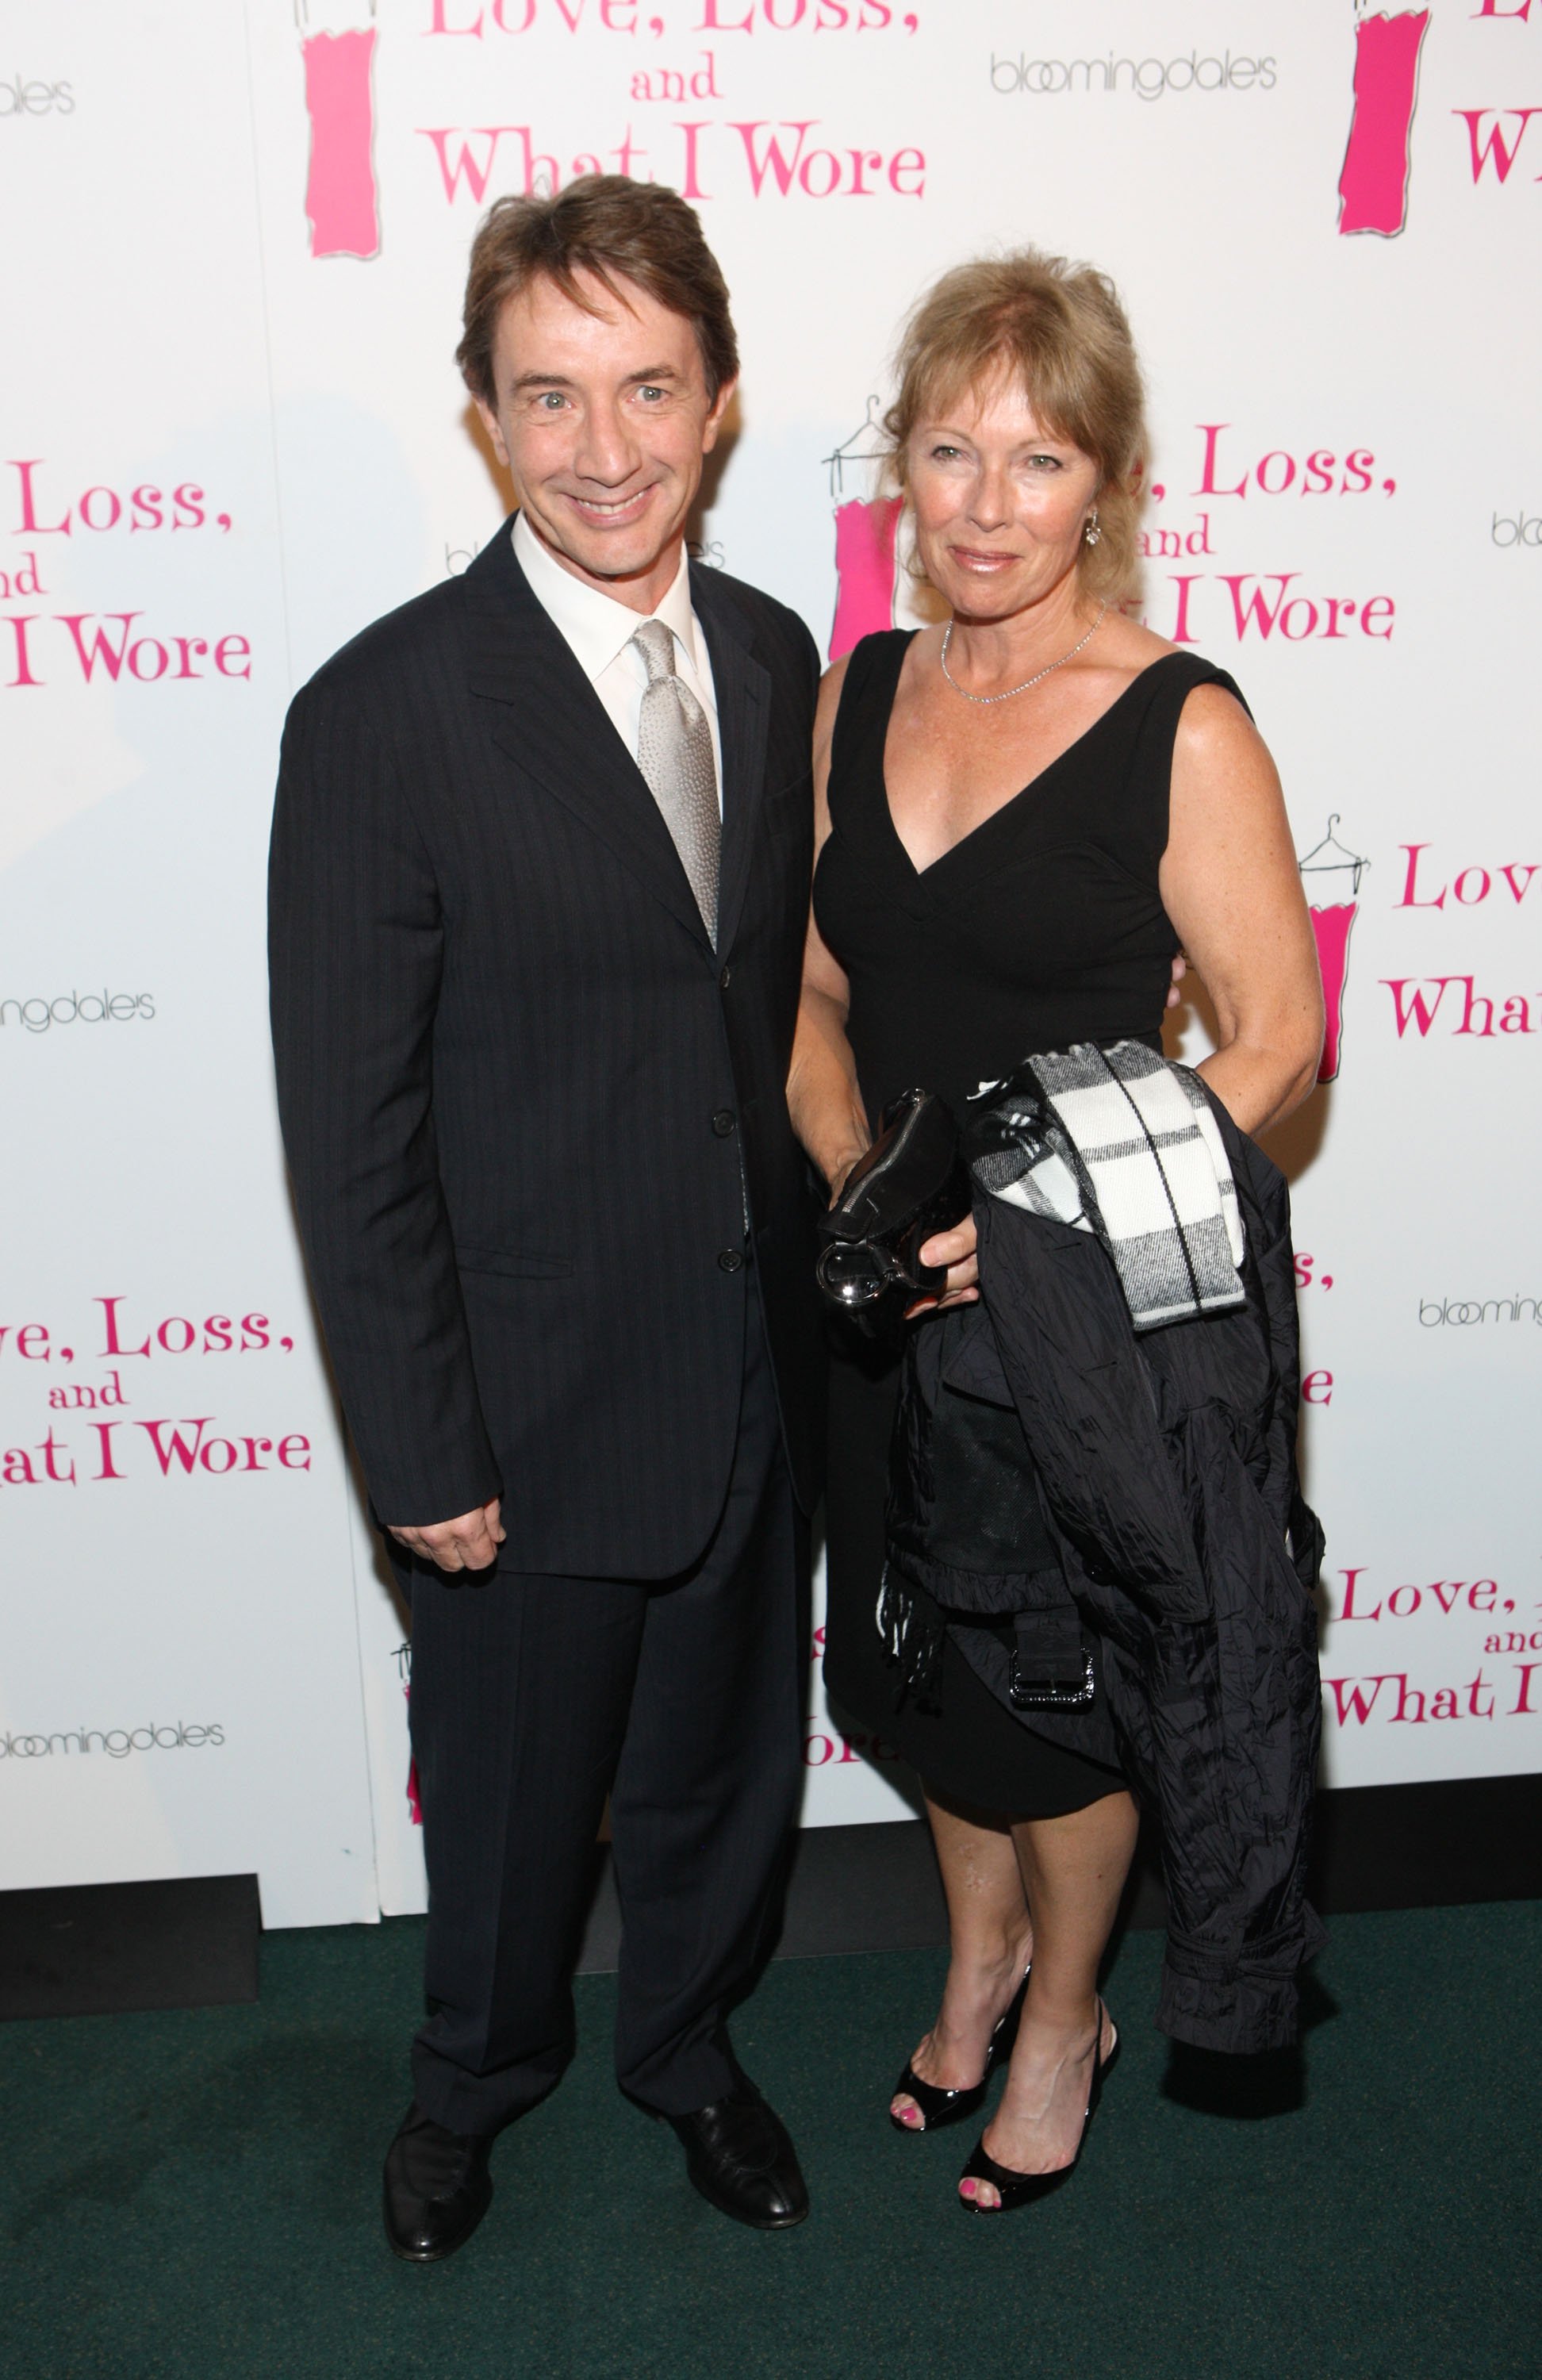 Martin Short attends the Third Annual Love Rocks NYC Benefit Concert for God's Love We Deliver on March 07, 2019 in New York City. | Source: Getty Images